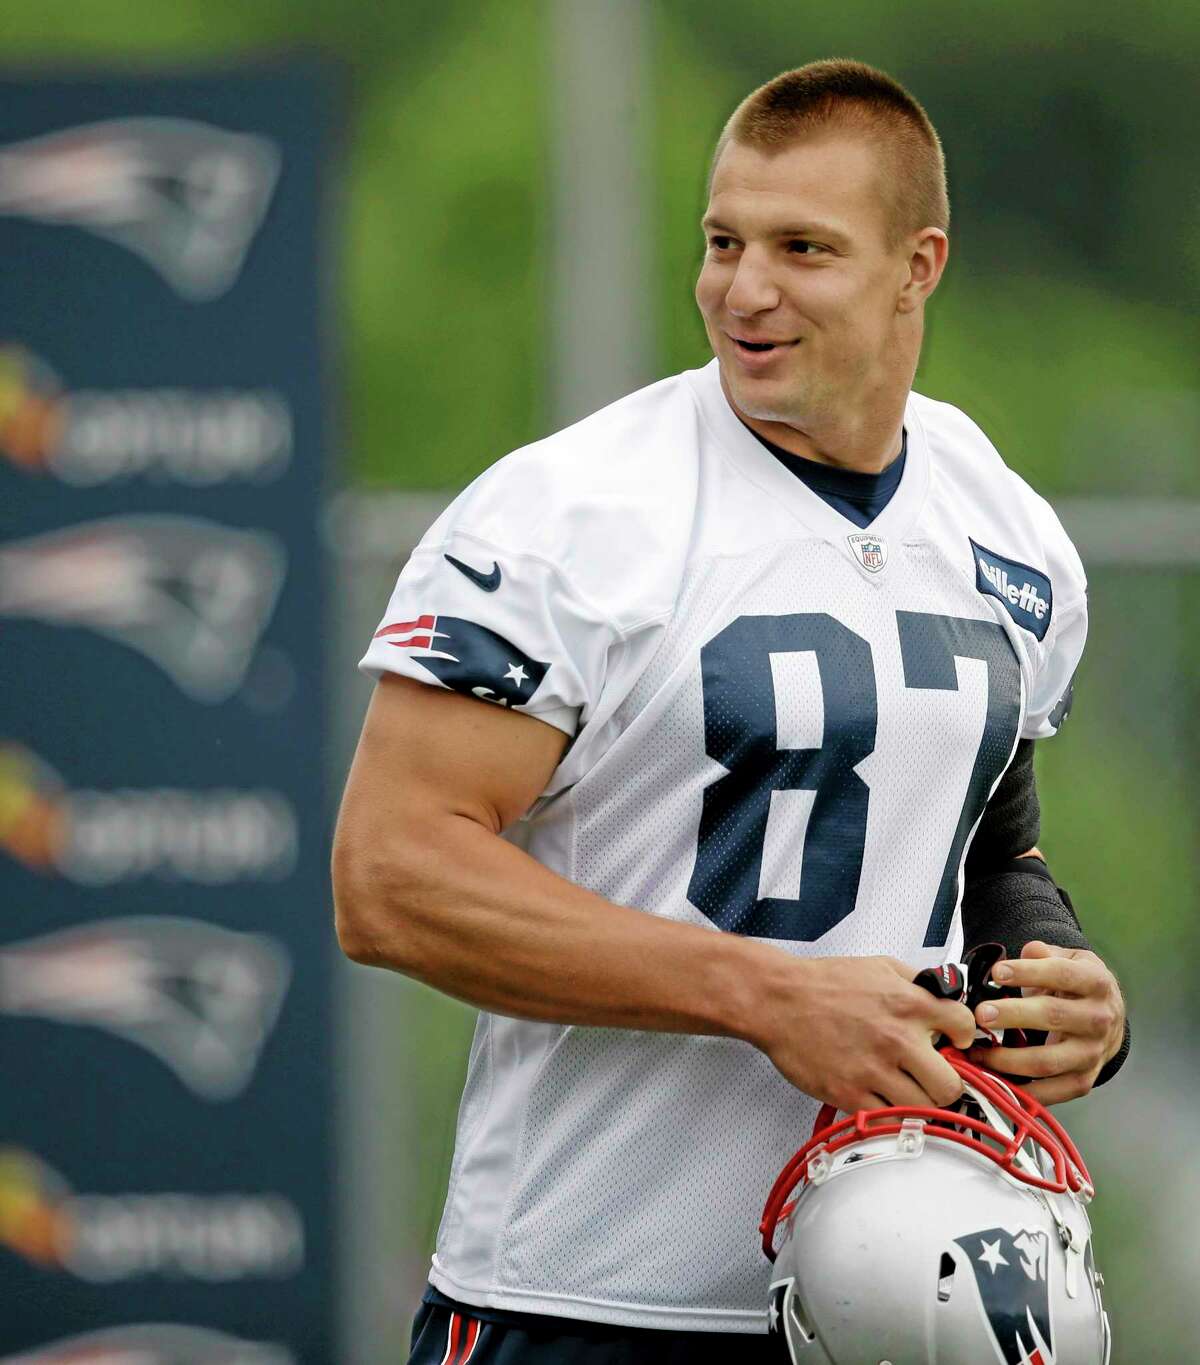 Rob Gronkowski is getting some help from Tom Brady and Darrelle Revis as he continues his comeback.